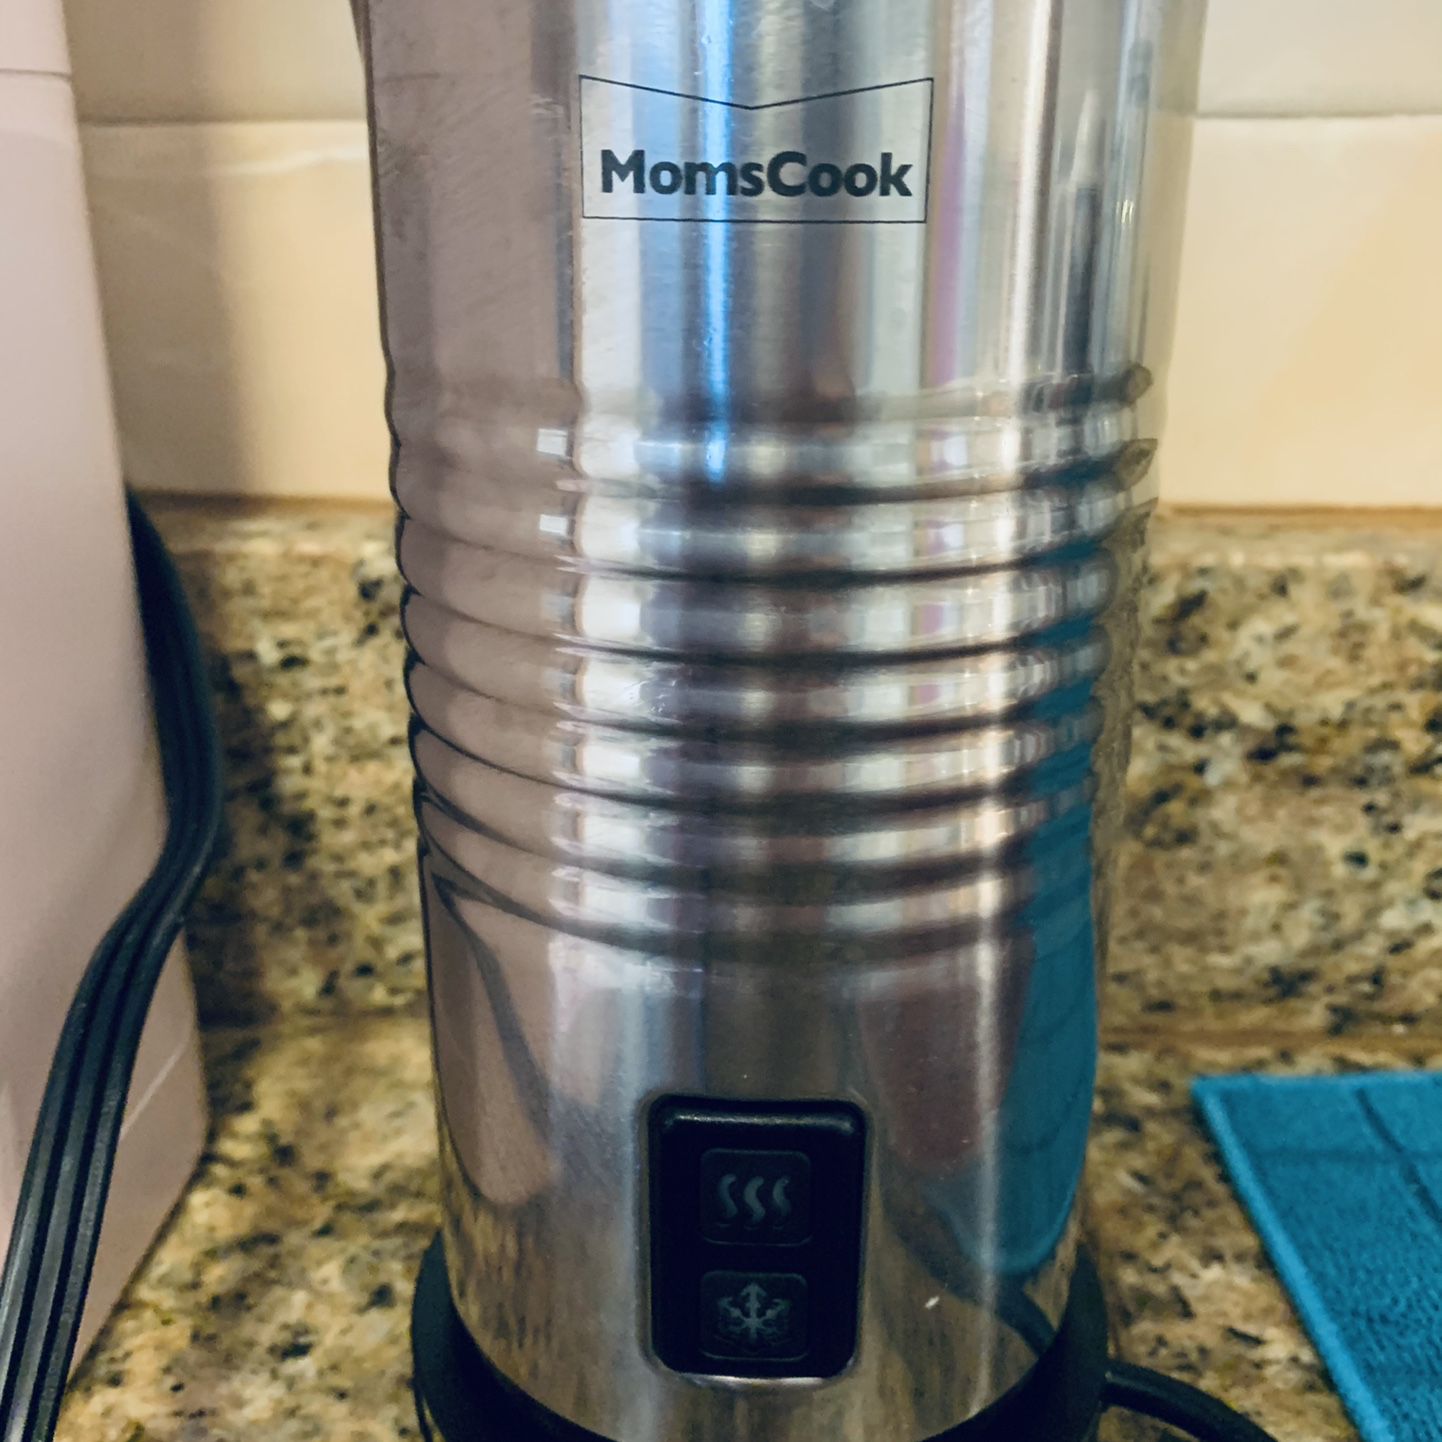 Cuisinart Milk Frother Tazzaccino FR-10 for Sale in Niles, IL - OfferUp